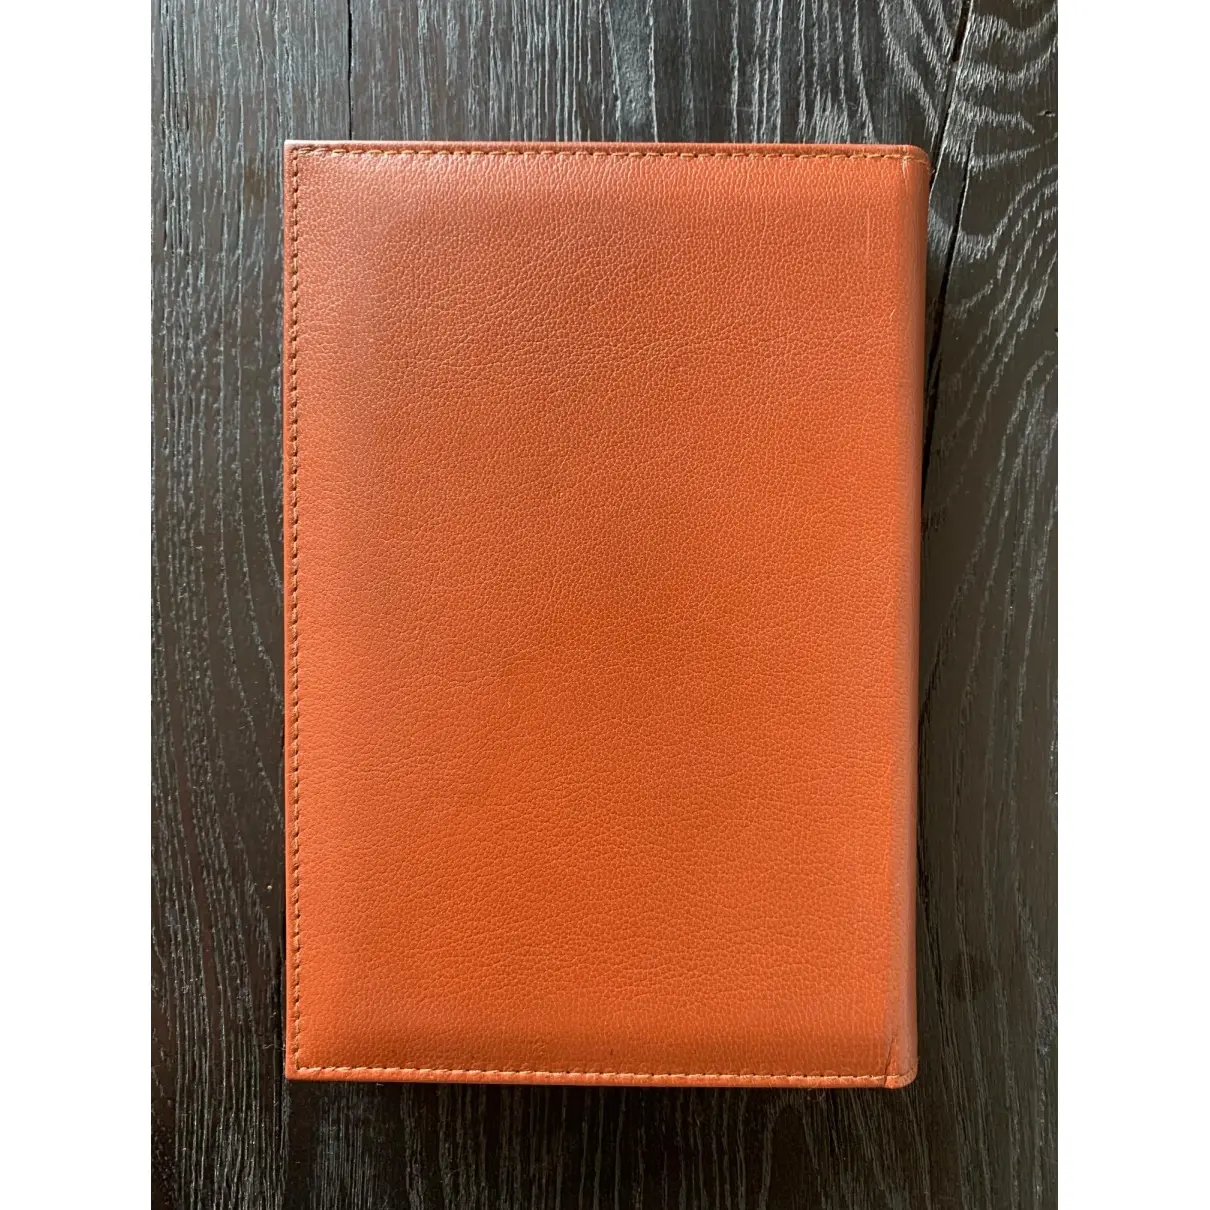 Rolex Leather diary for sale - Vintage